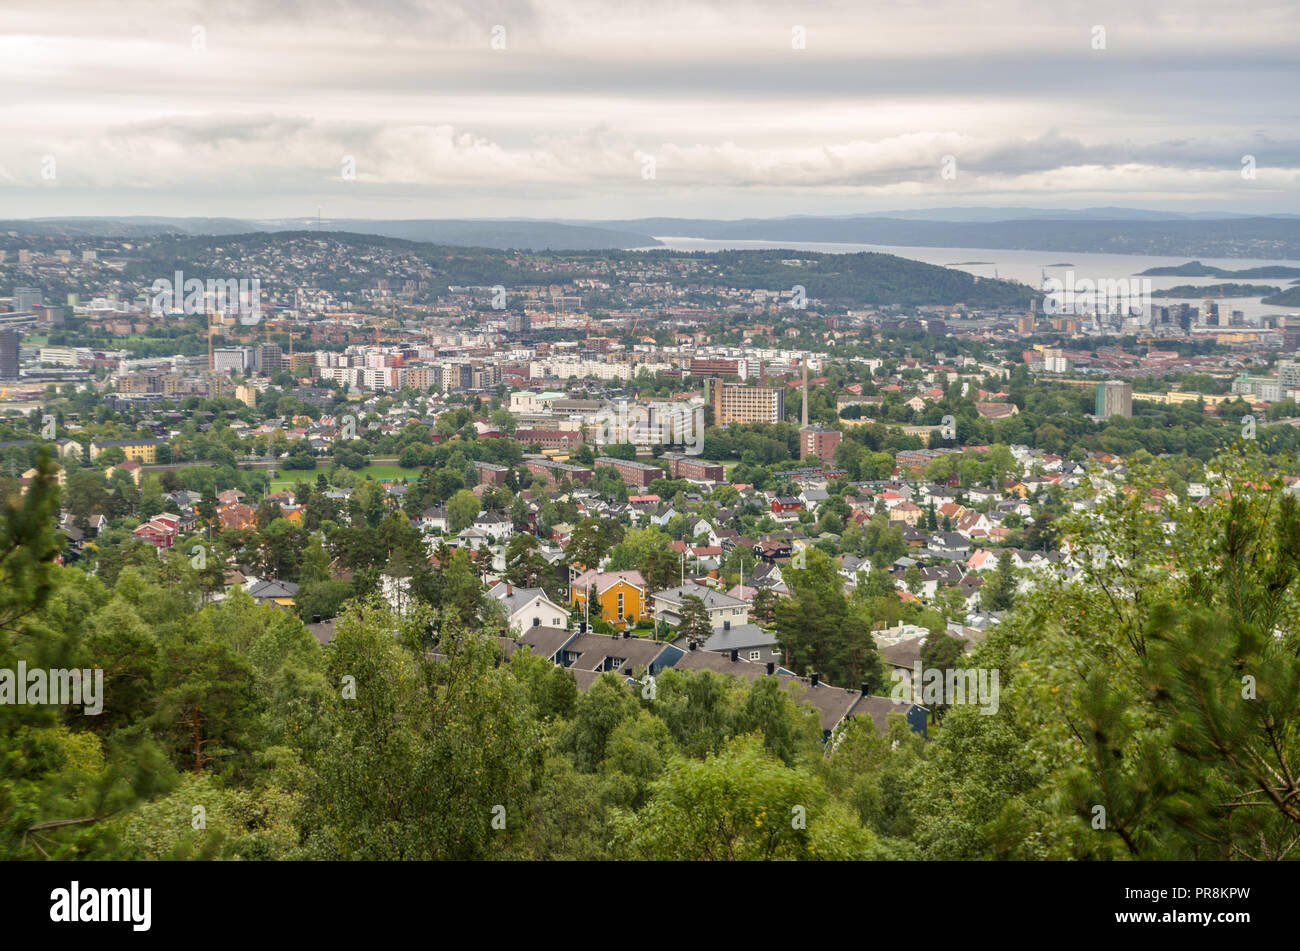 High populated area of Oslo, Norway. Stock Photo